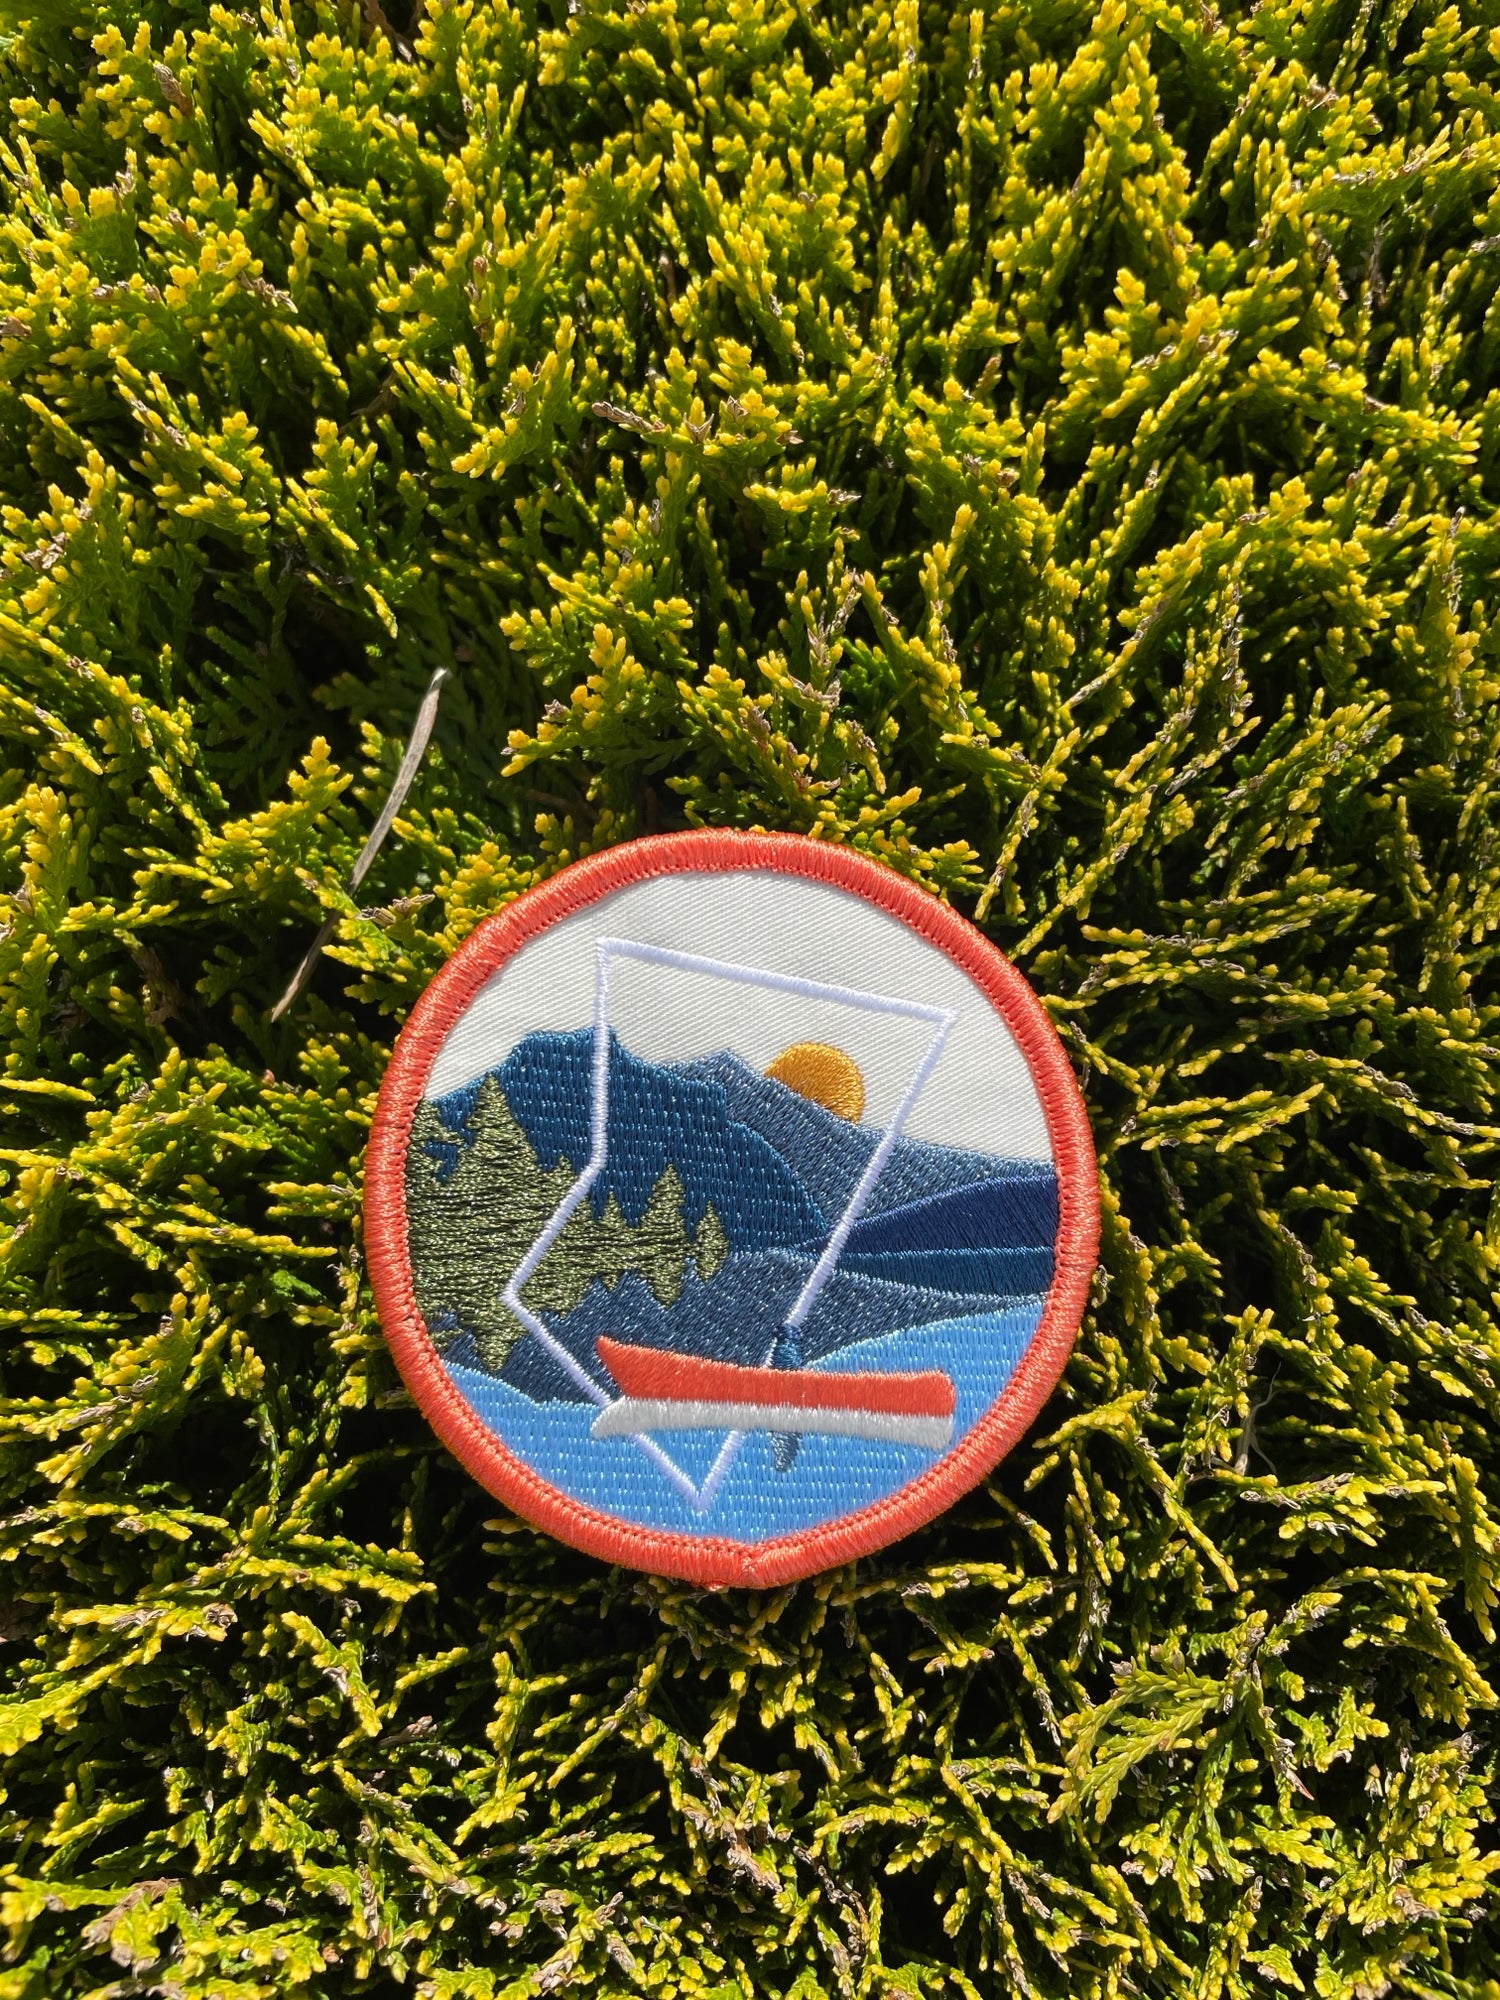 Canoeing Patch